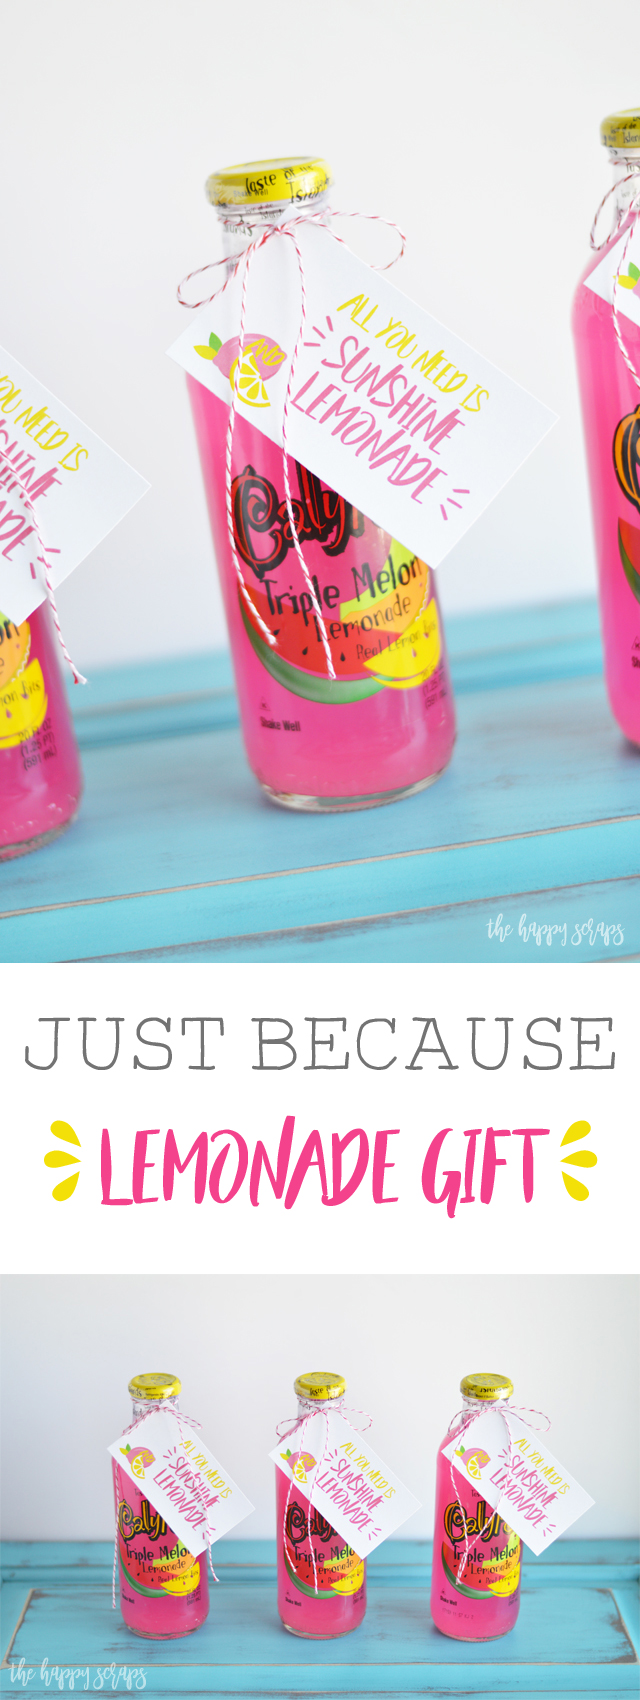 Sometimes you just need a little something to give to a friend! This Just Because - Lemonade Gift is the perfect way to brighten someones day. 